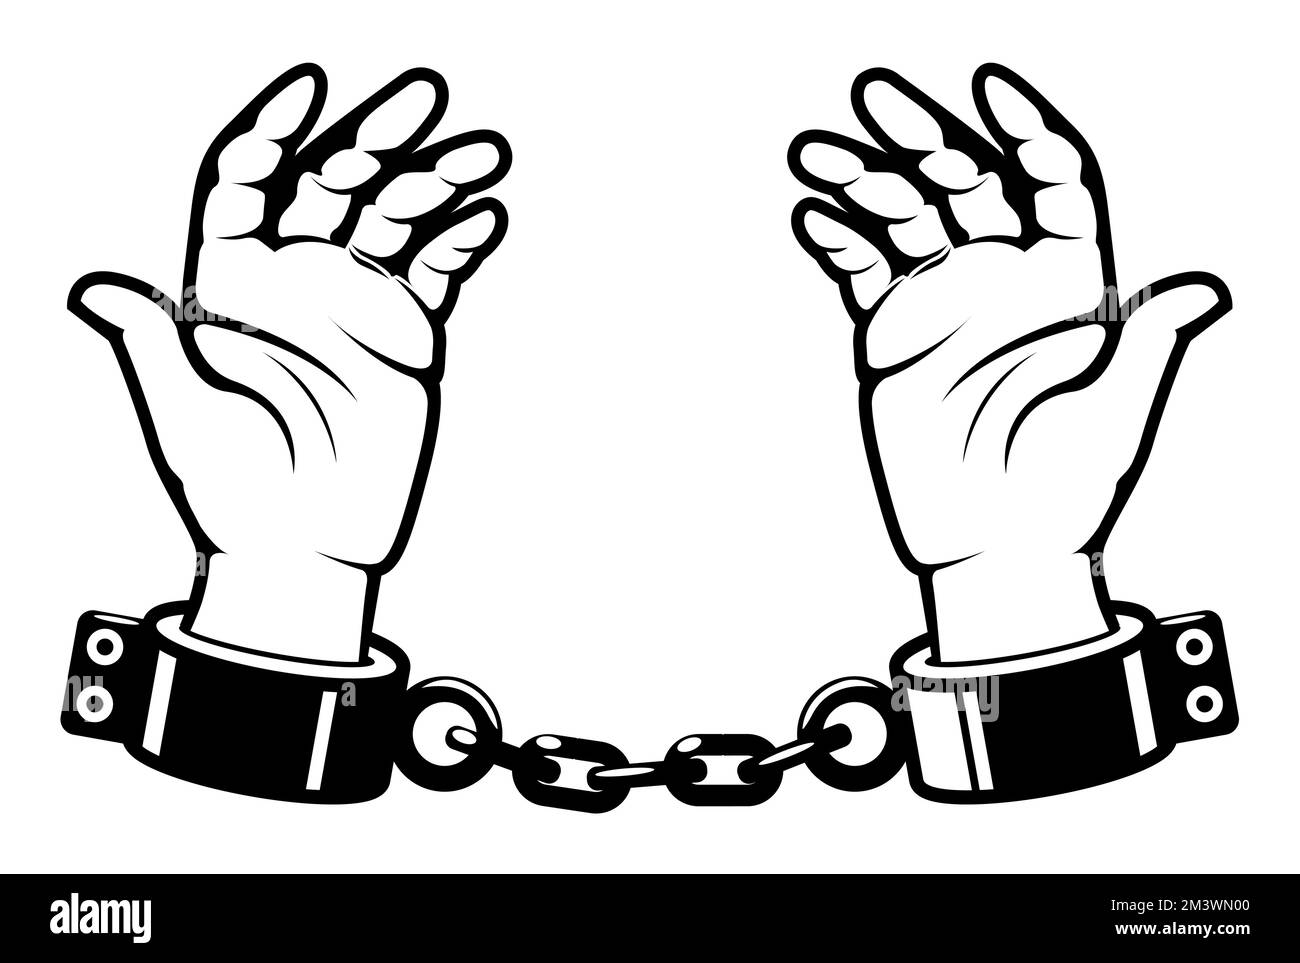 Man hands with shackles on wrists, slave handcuffed, prisoner fetter, encumbrance or debt concept , vector Stock Vector